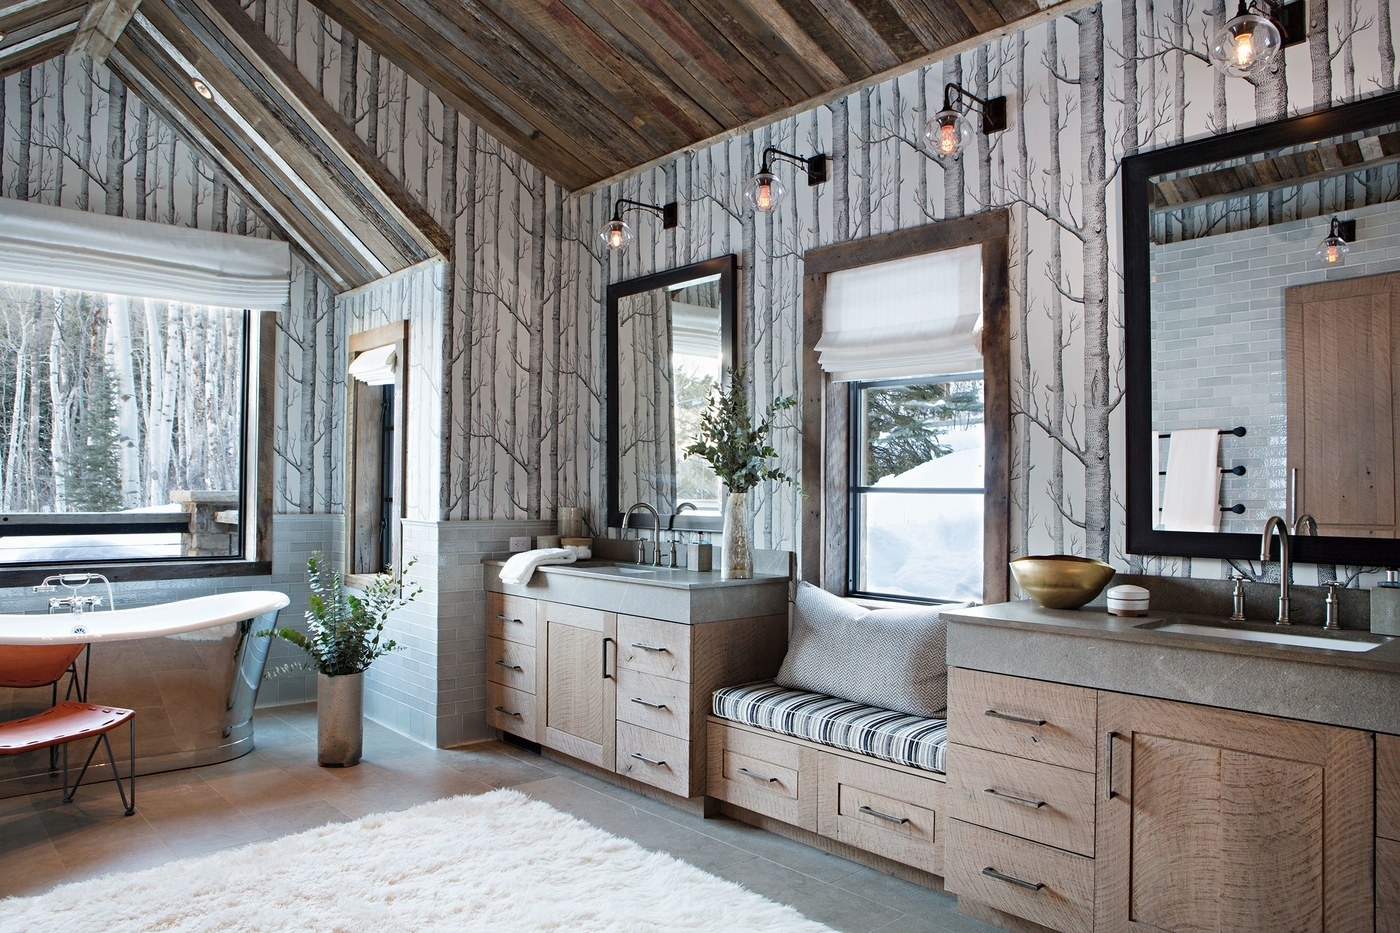 Rustic Log Home French Country Interior Design